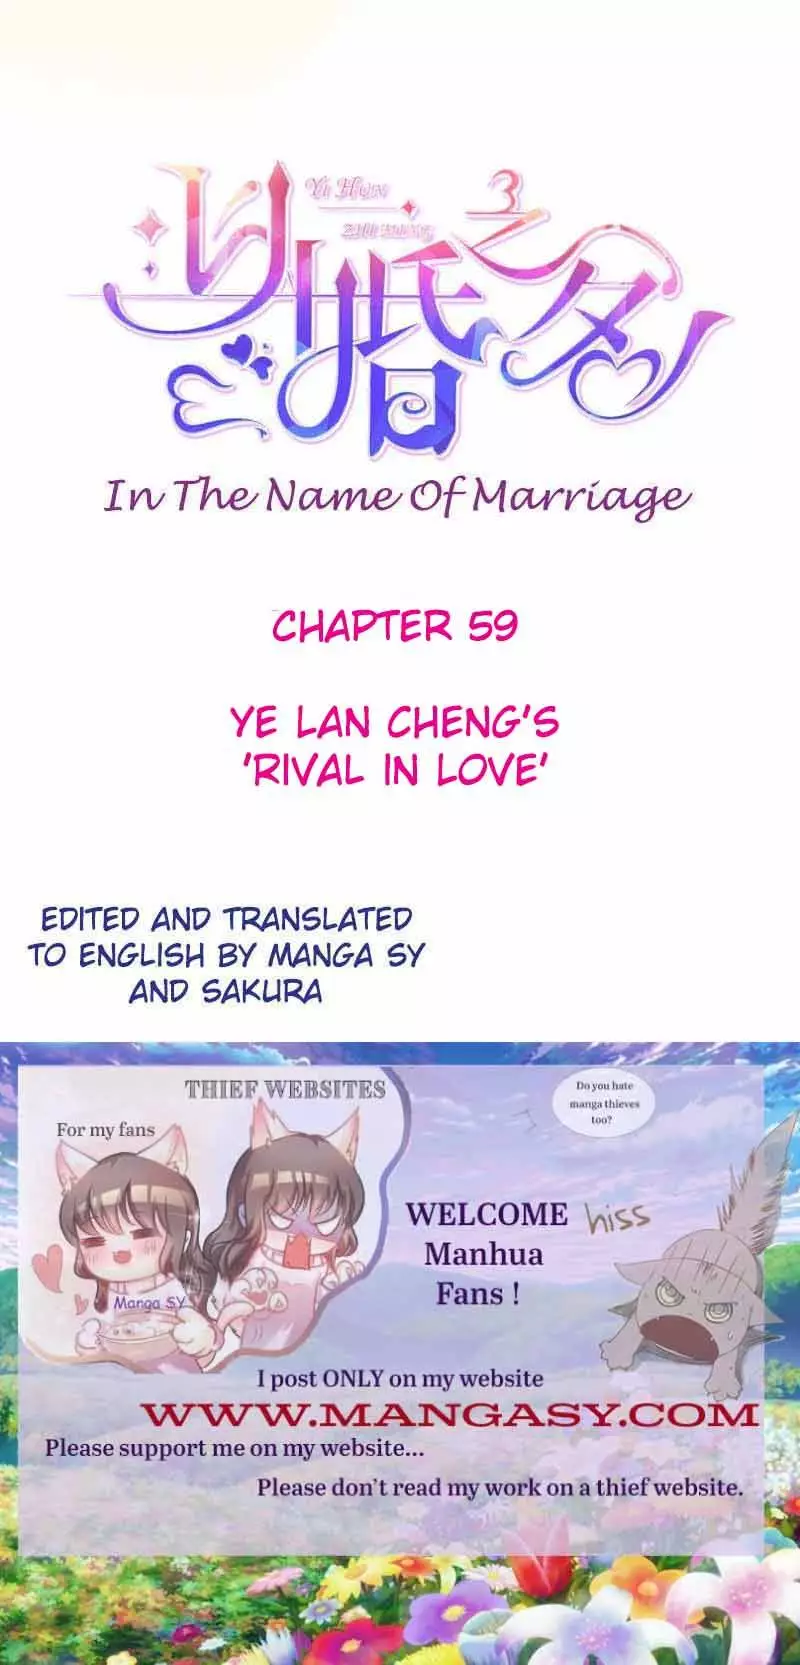 In The Name Of Marriage - 59 page 1-900a9f3c